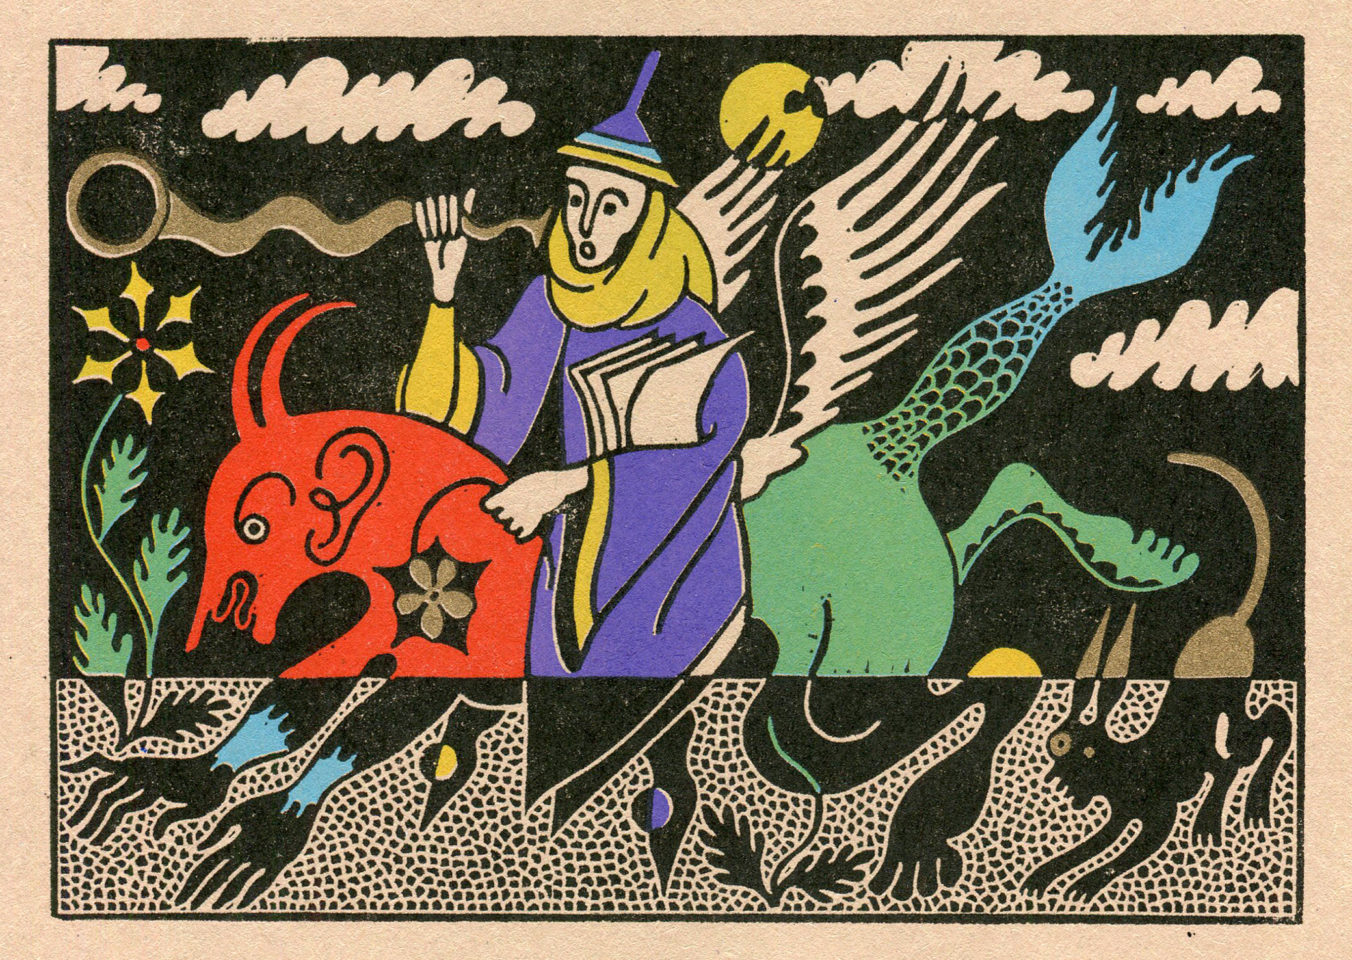 An illustration of a person wearing a purple robe. They are riding a horse. The horse has wings and a fish tail.